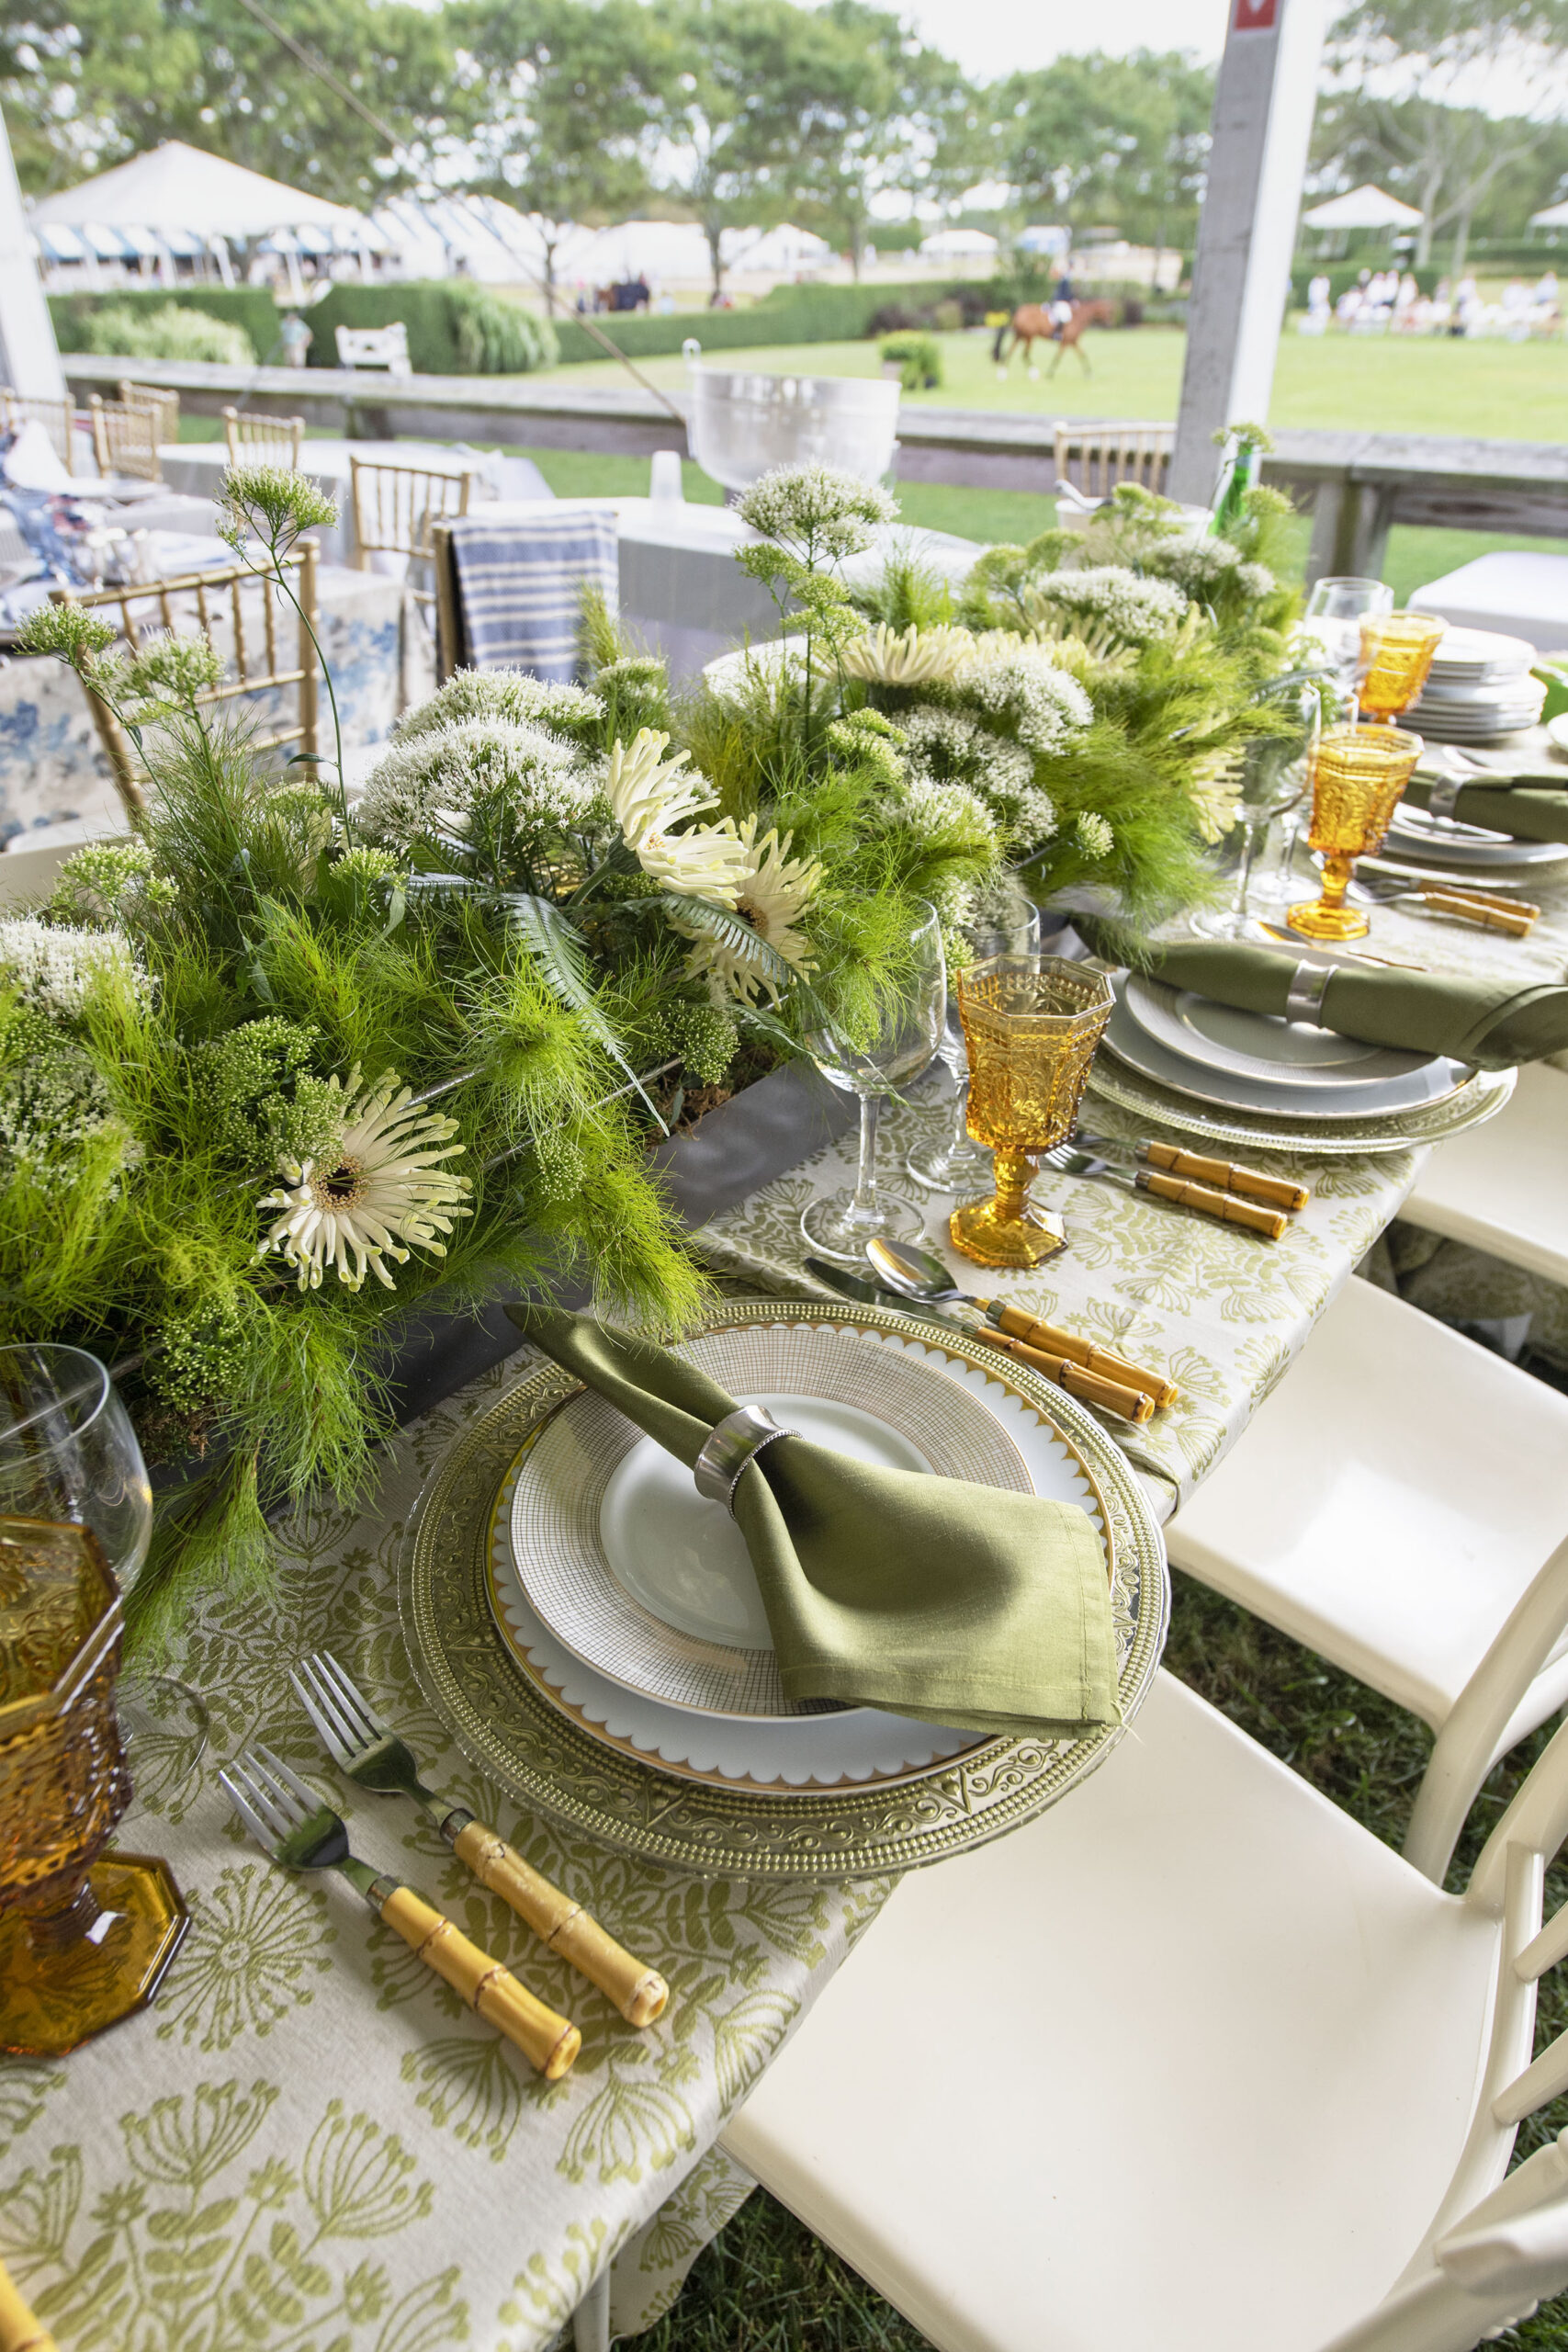 The table setting for the Twin Oaks Ventures table in the VIP tent at the 2021 Hampton Classic on Grand Prix Sunday, September 5th, 2021